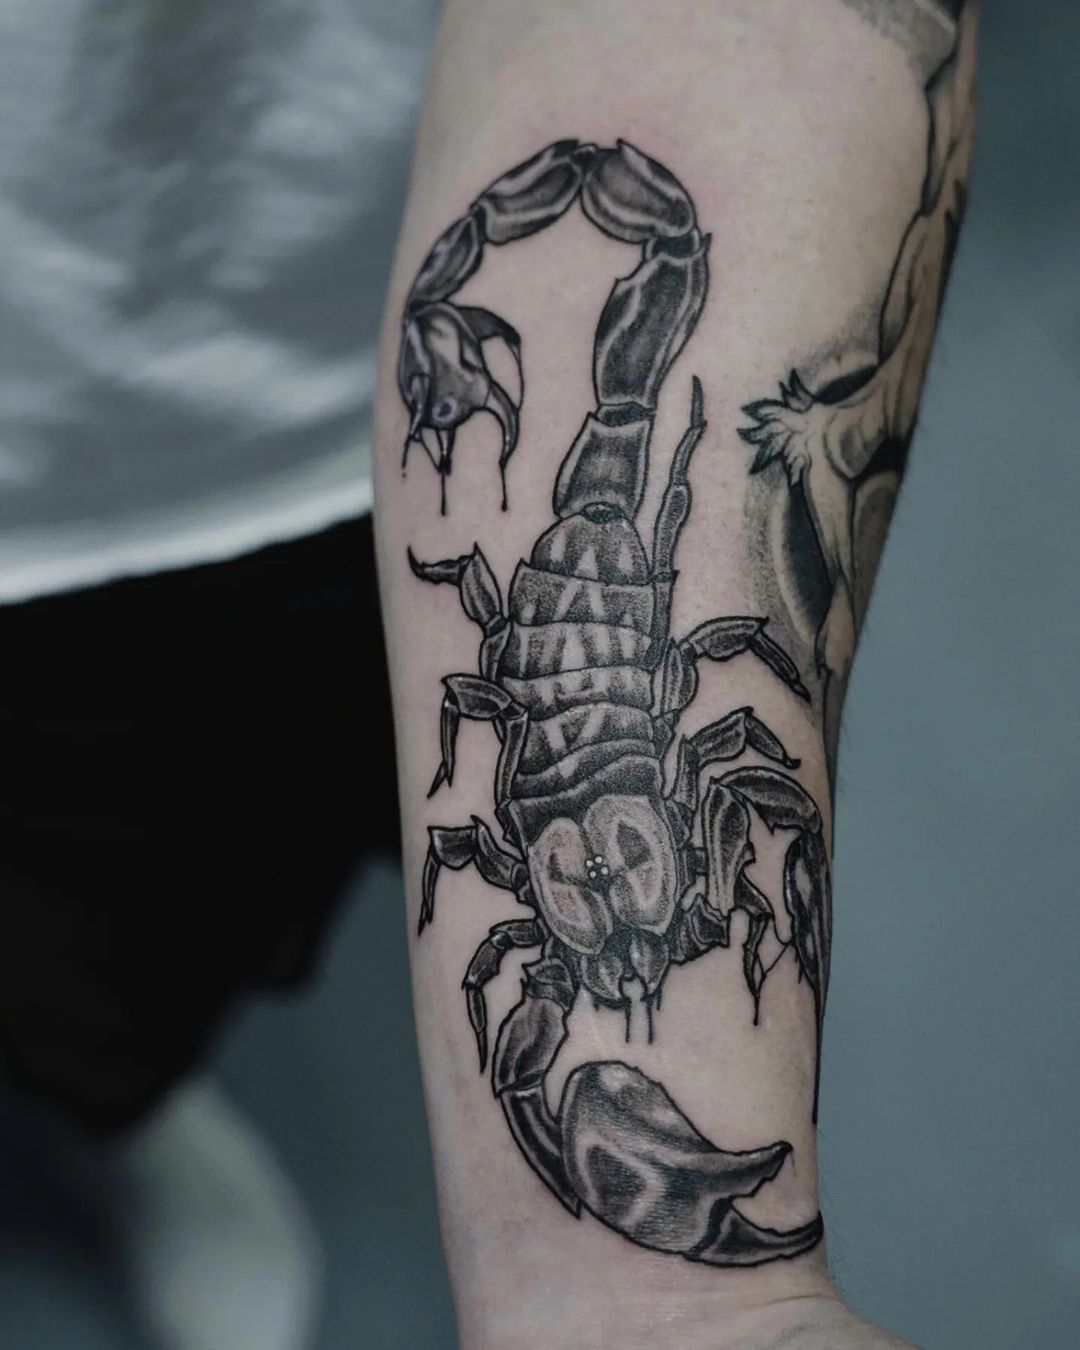 Some of the meanings associated with the scorpion include intimidation,  fear, toughness, strength, danger, death, defensiveness, and evil... |  Instagram